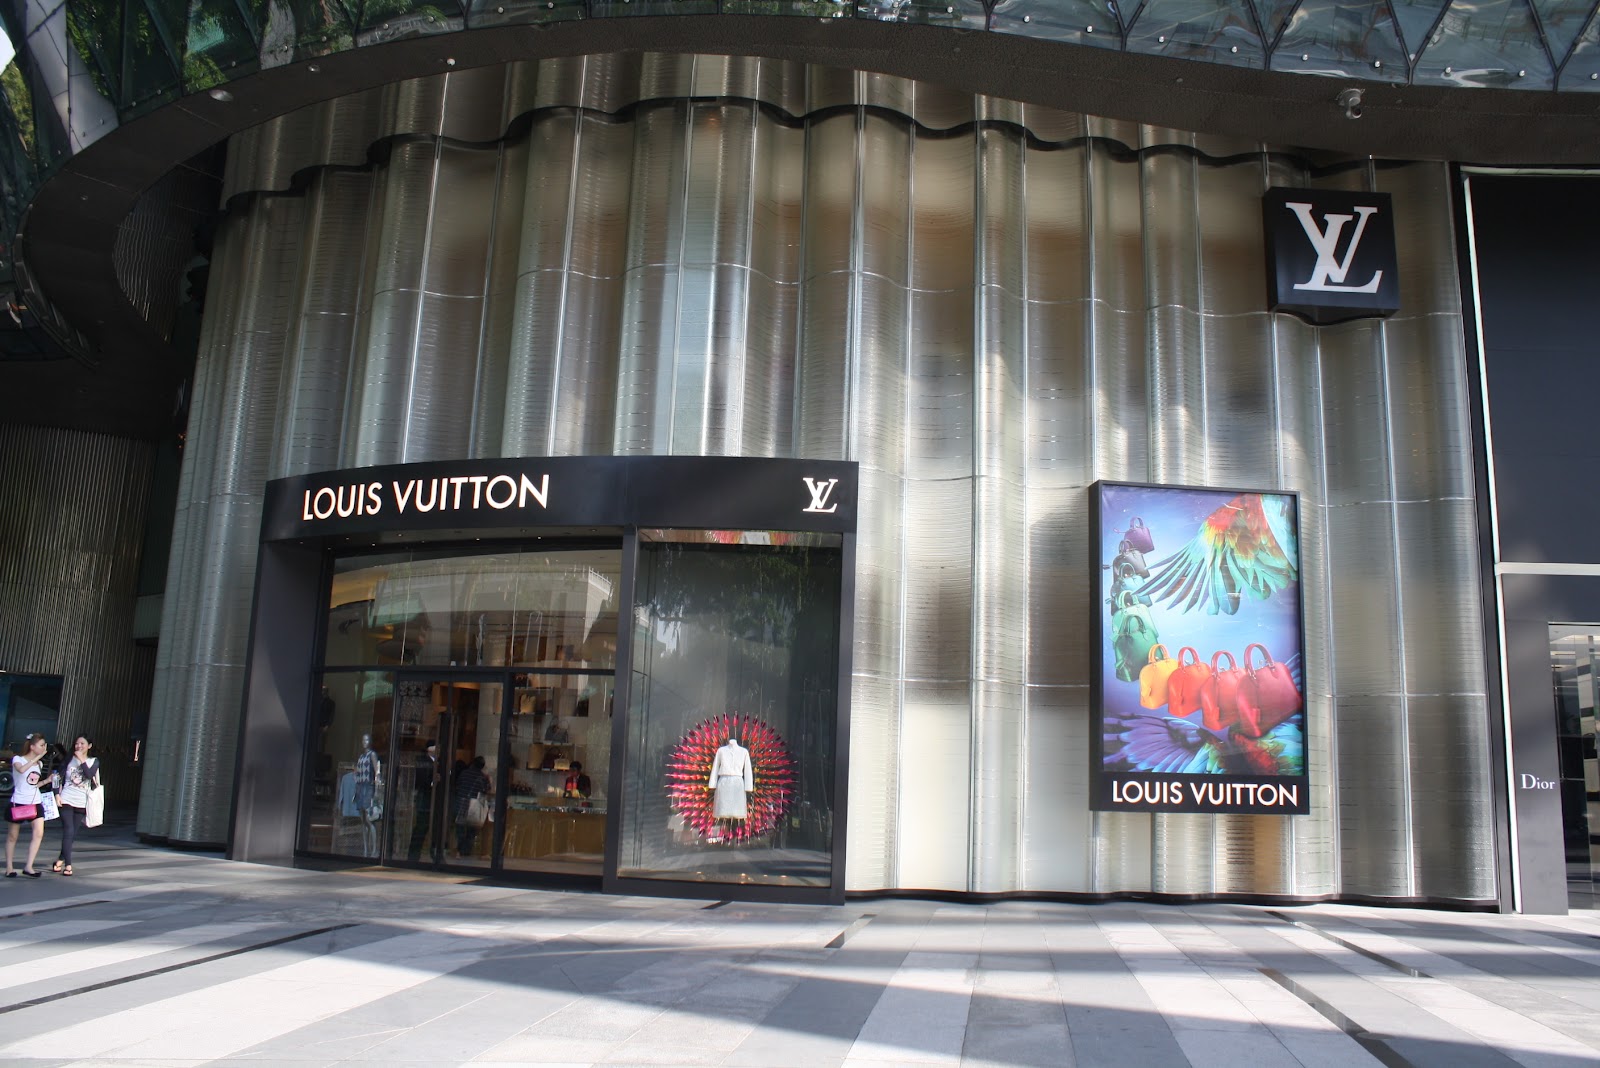 displayhunter: Louis Vuitton: Special exterior for ION Orchard